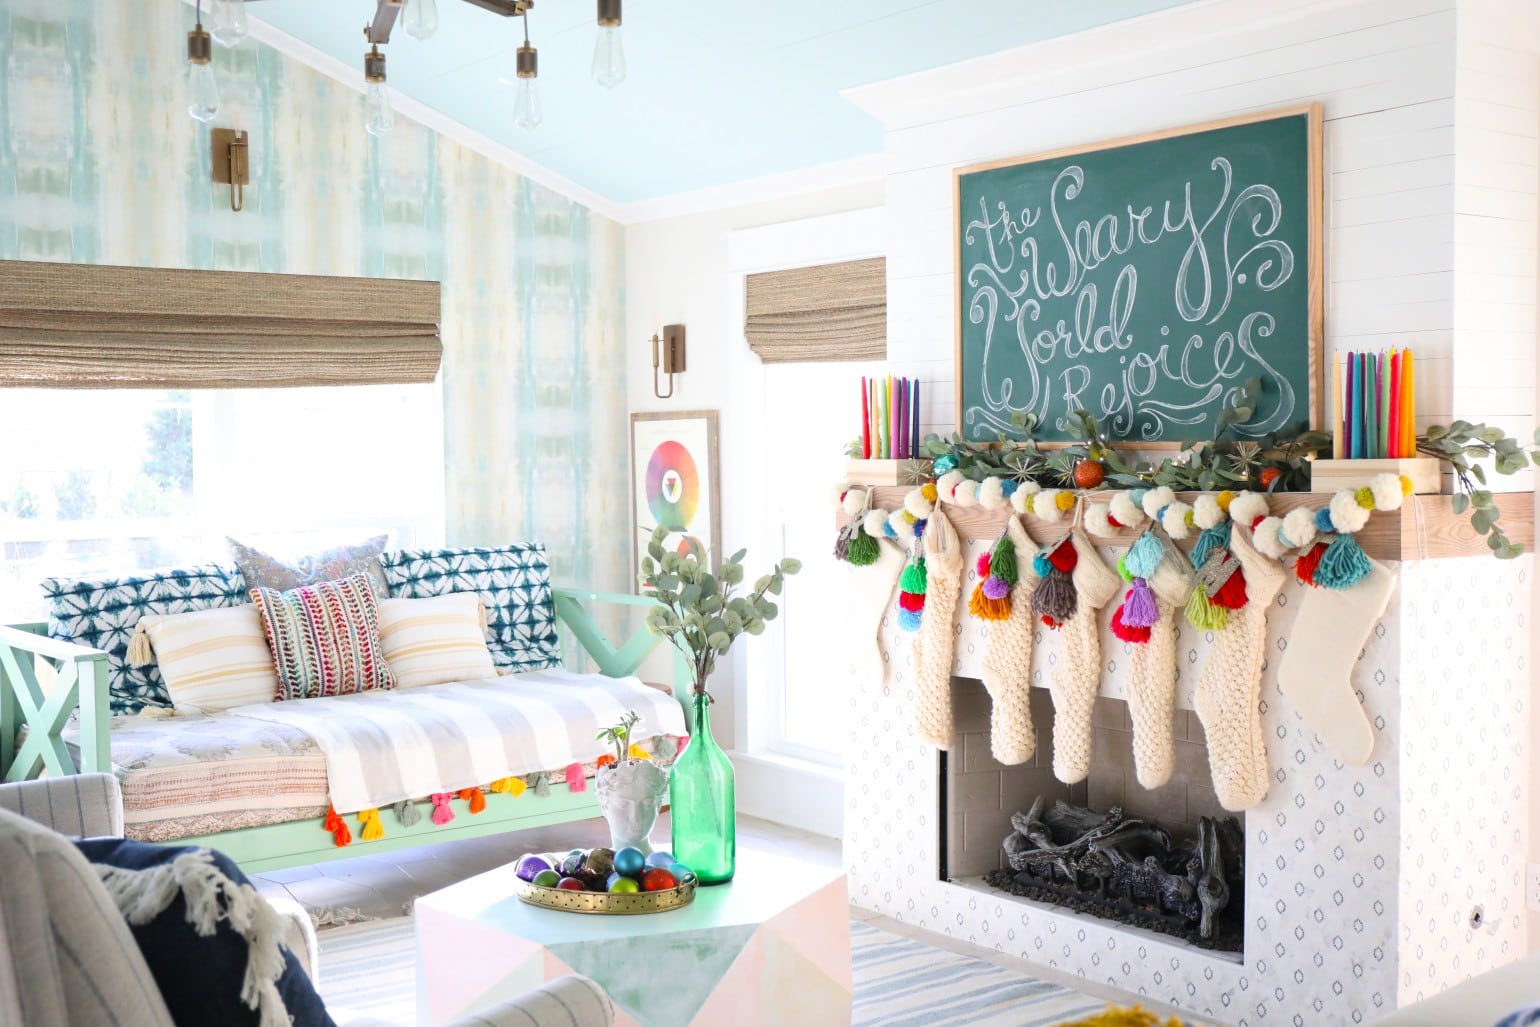 Christmas mantel with chalkboard sign and colorful stockings